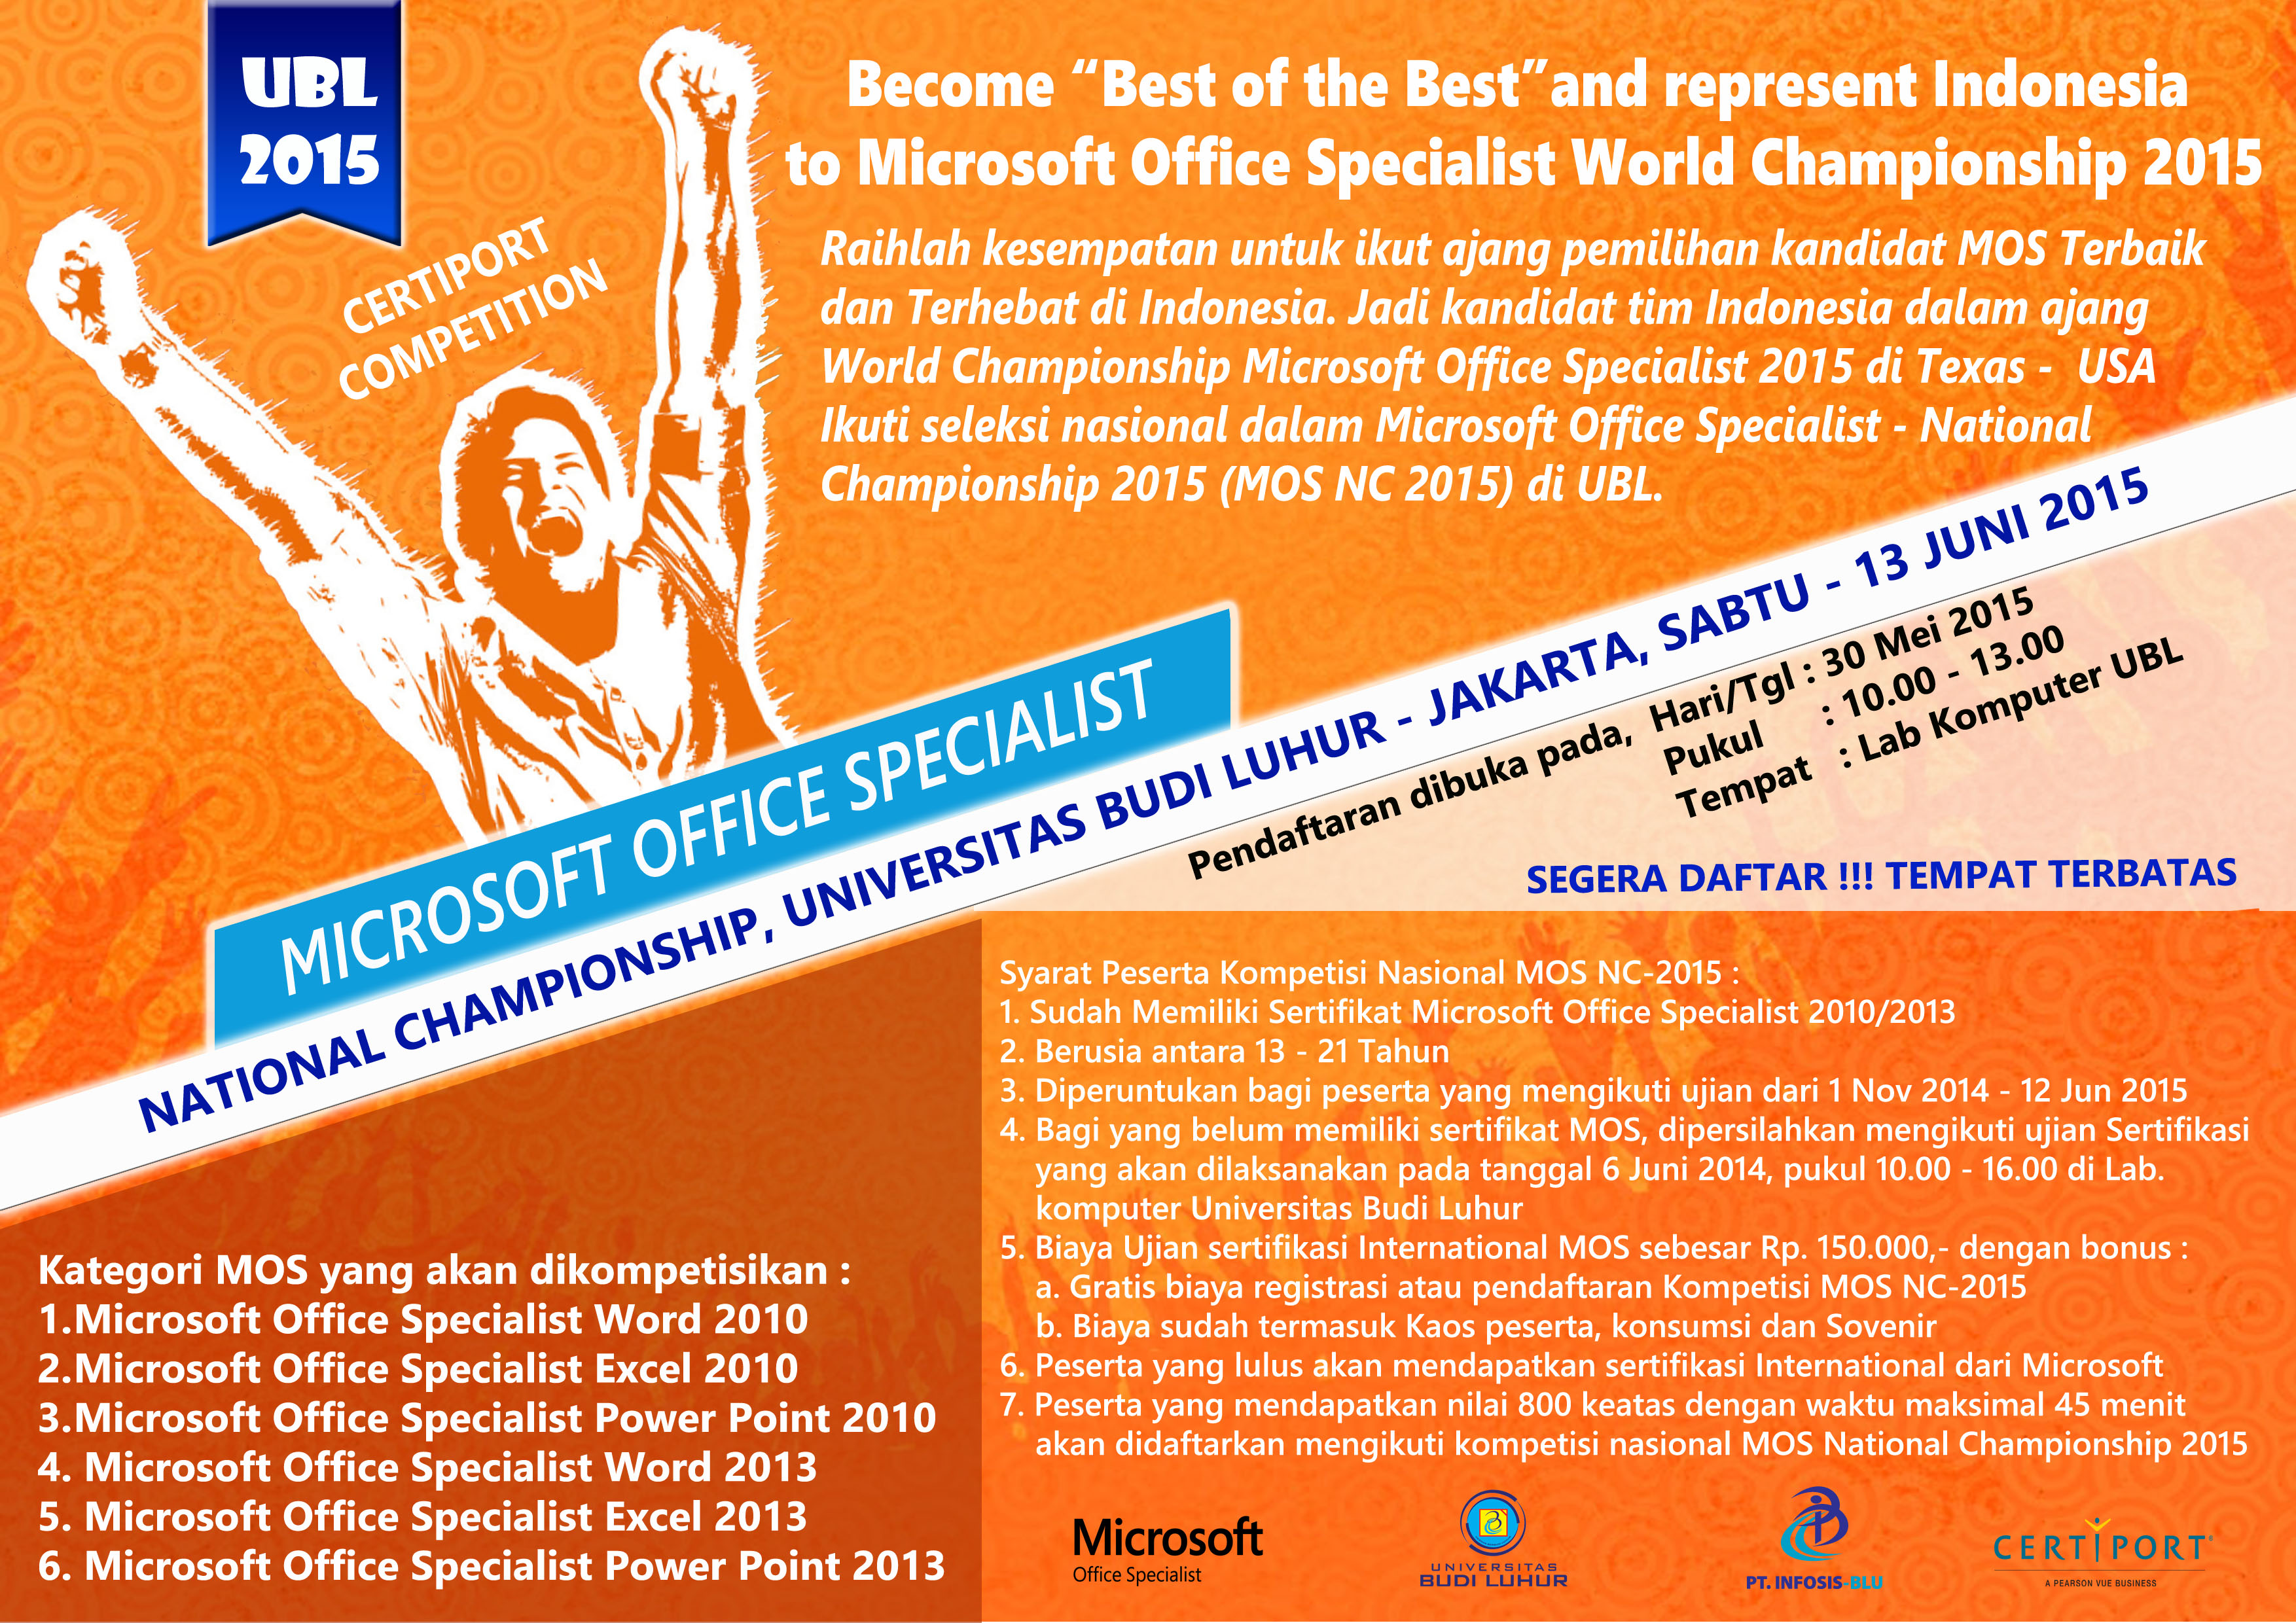 THE MICROSOFT OFFICE SPECIALIST (MOS) FIRST NATIONAL CHAMPIONSHIP IN INDONESIA, UNIV. BUDI LUHUR 13 JUNI 2015